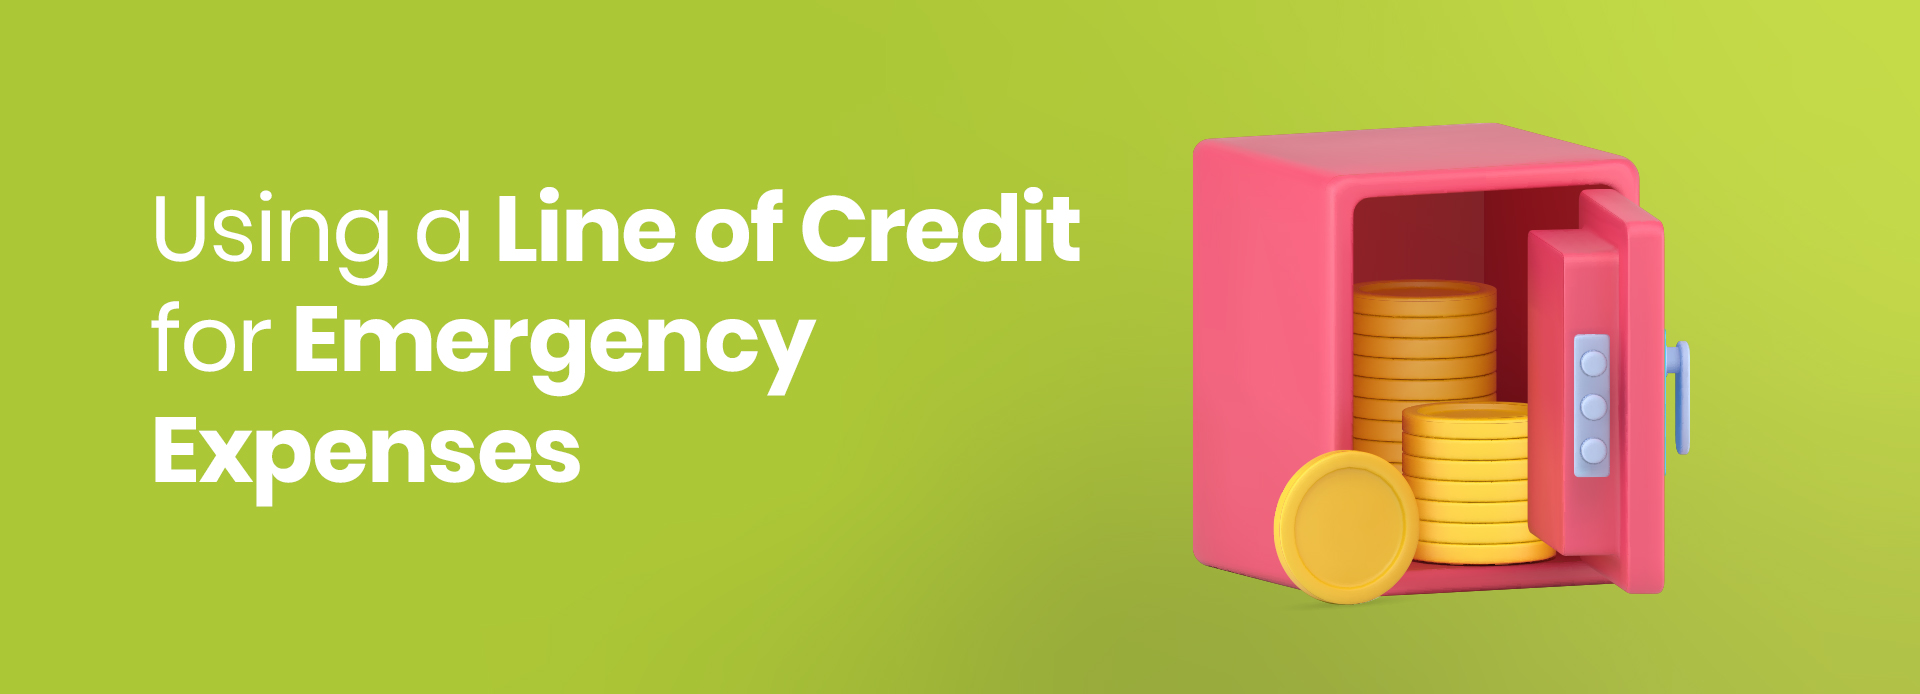 Using a Line of Credit in Emergency: Pros and Cons